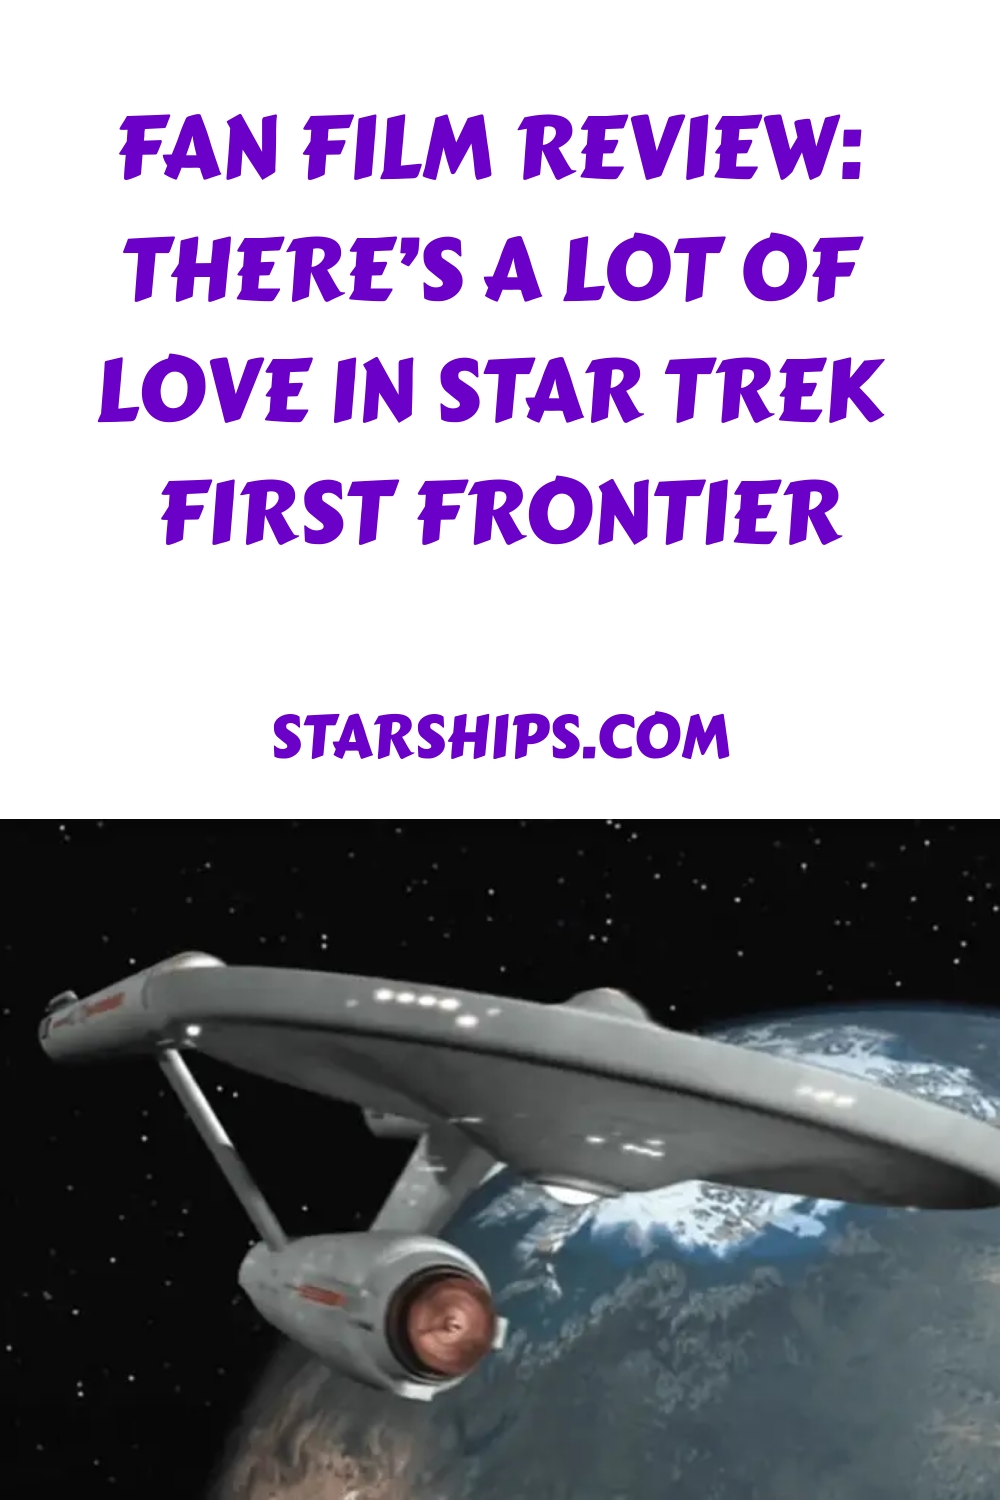 Fan Film Review Theres A Lot of Love In Star Trek First Frontier generated pin 56628